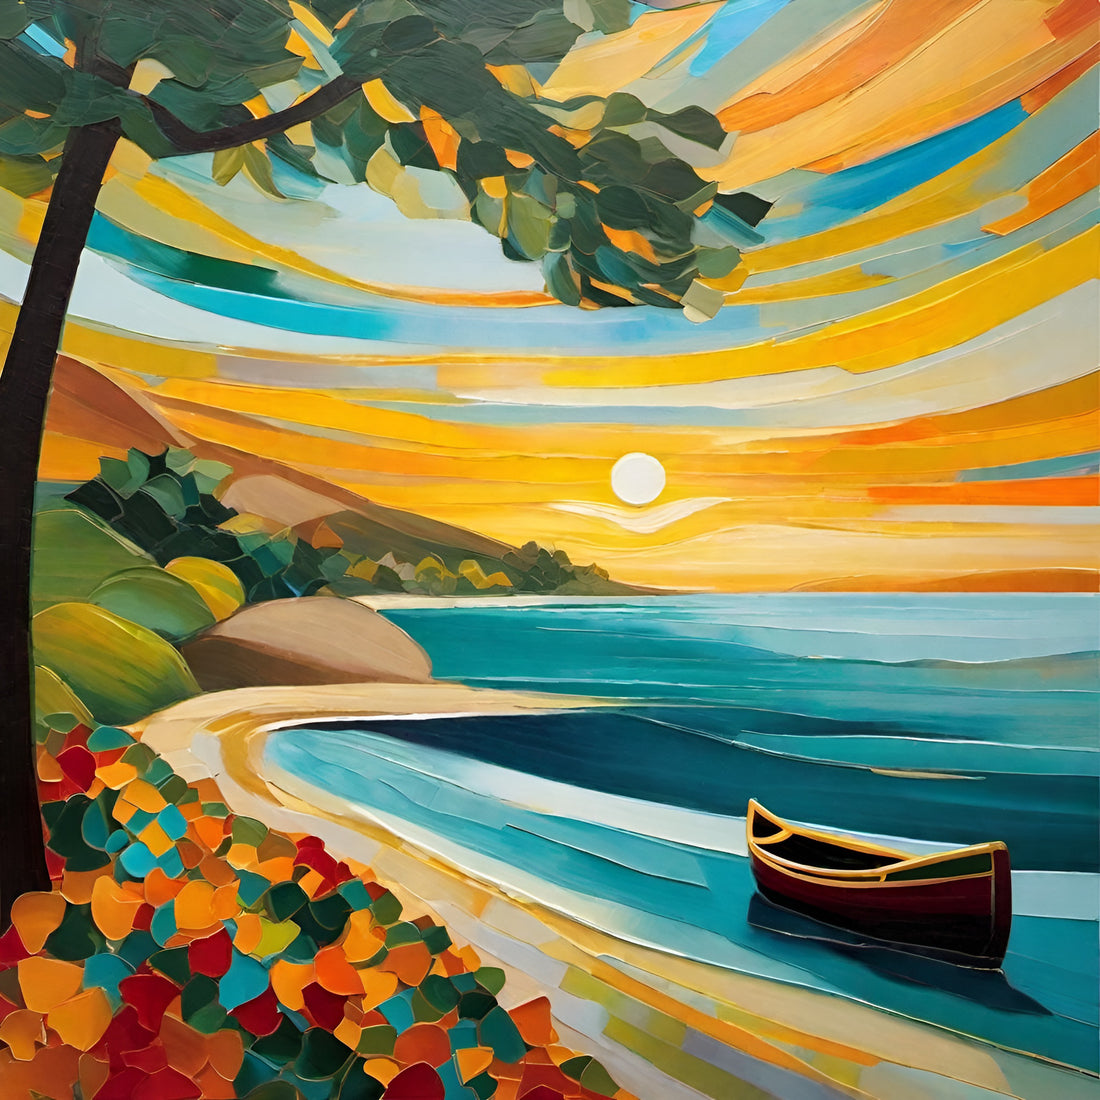 Painting of a serene boat by the beach, bathed in the golden hues of sunrise, symbolizing the themes of Hemingway's The Sun Also Rises. Found only at Kadri Books.